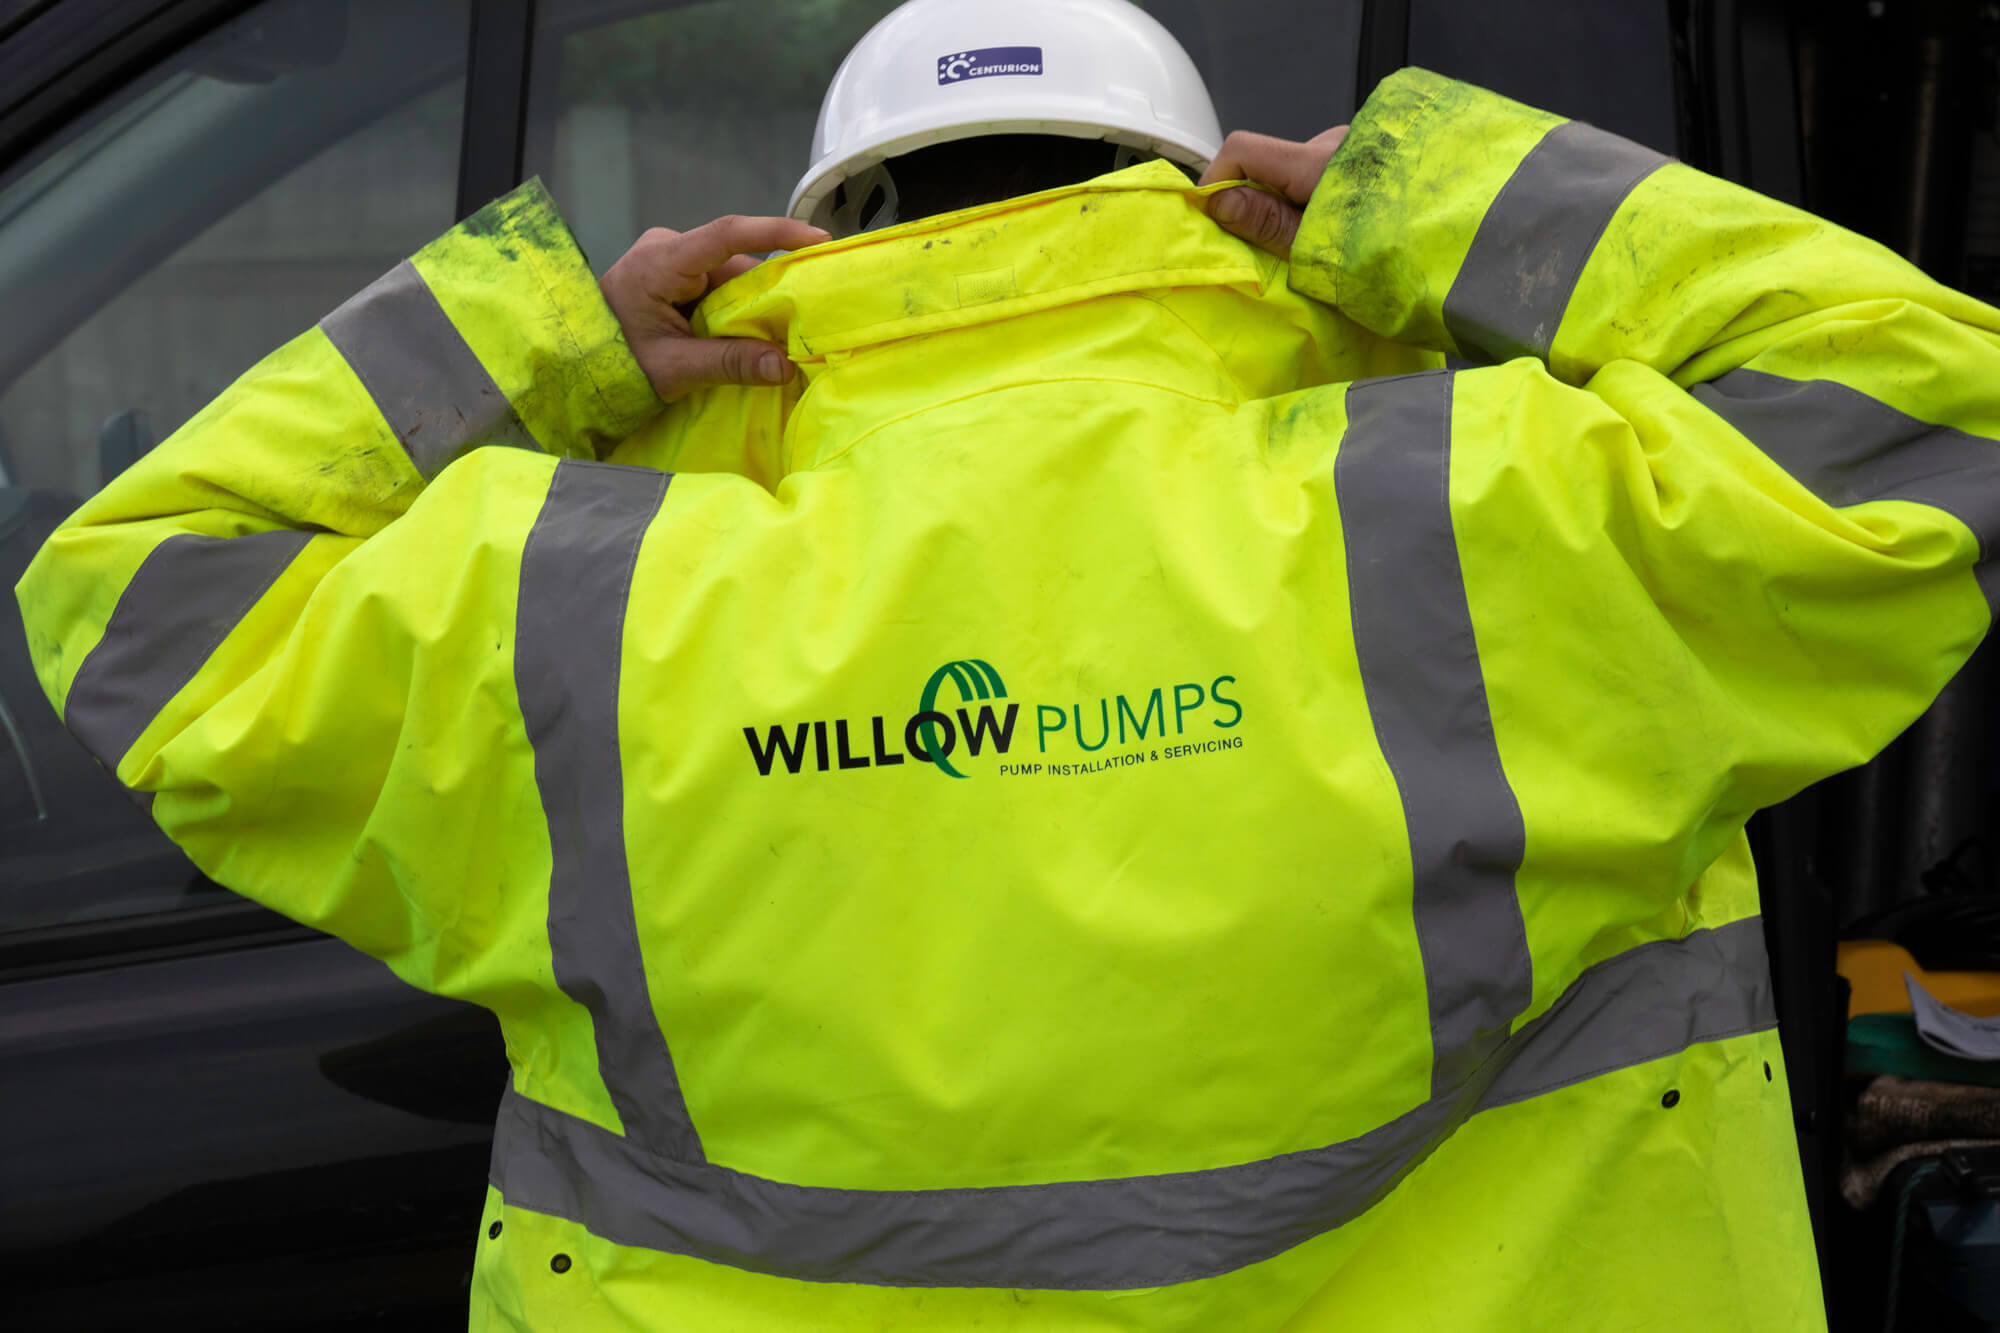 Contact Willow Pumps for all your pumping station needs